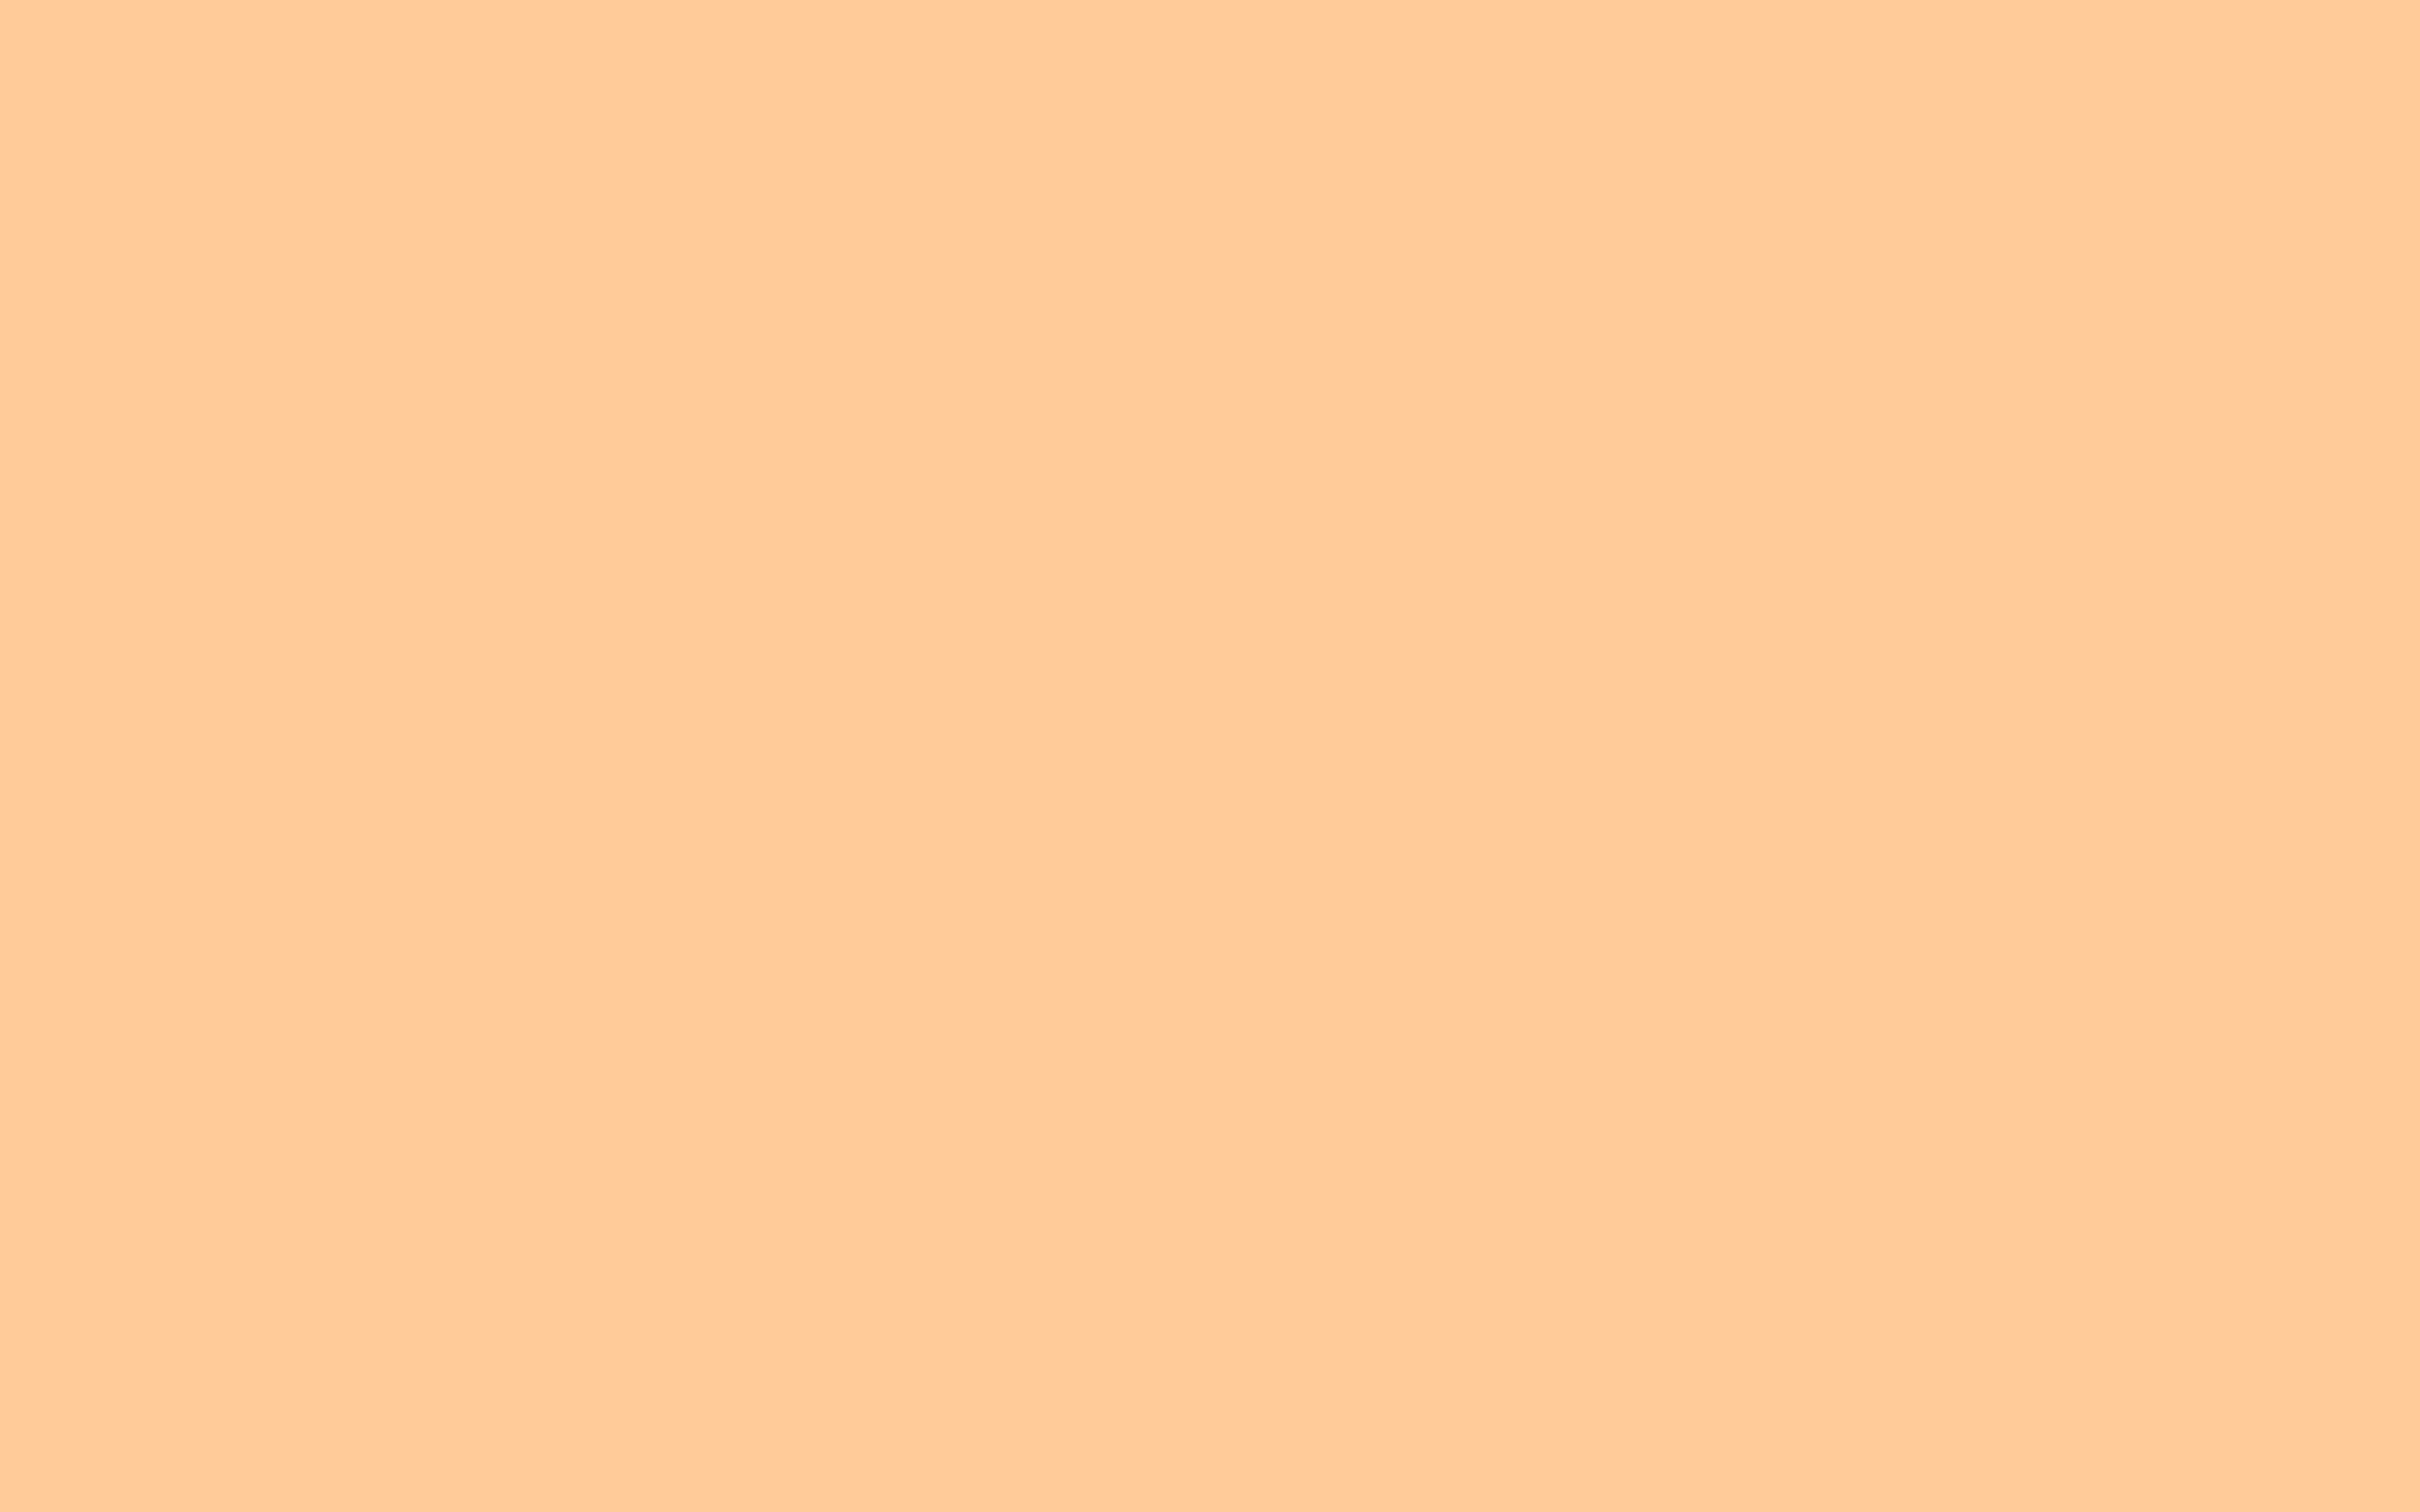 Free 2560x1600 resolution Peach orange solid color background view